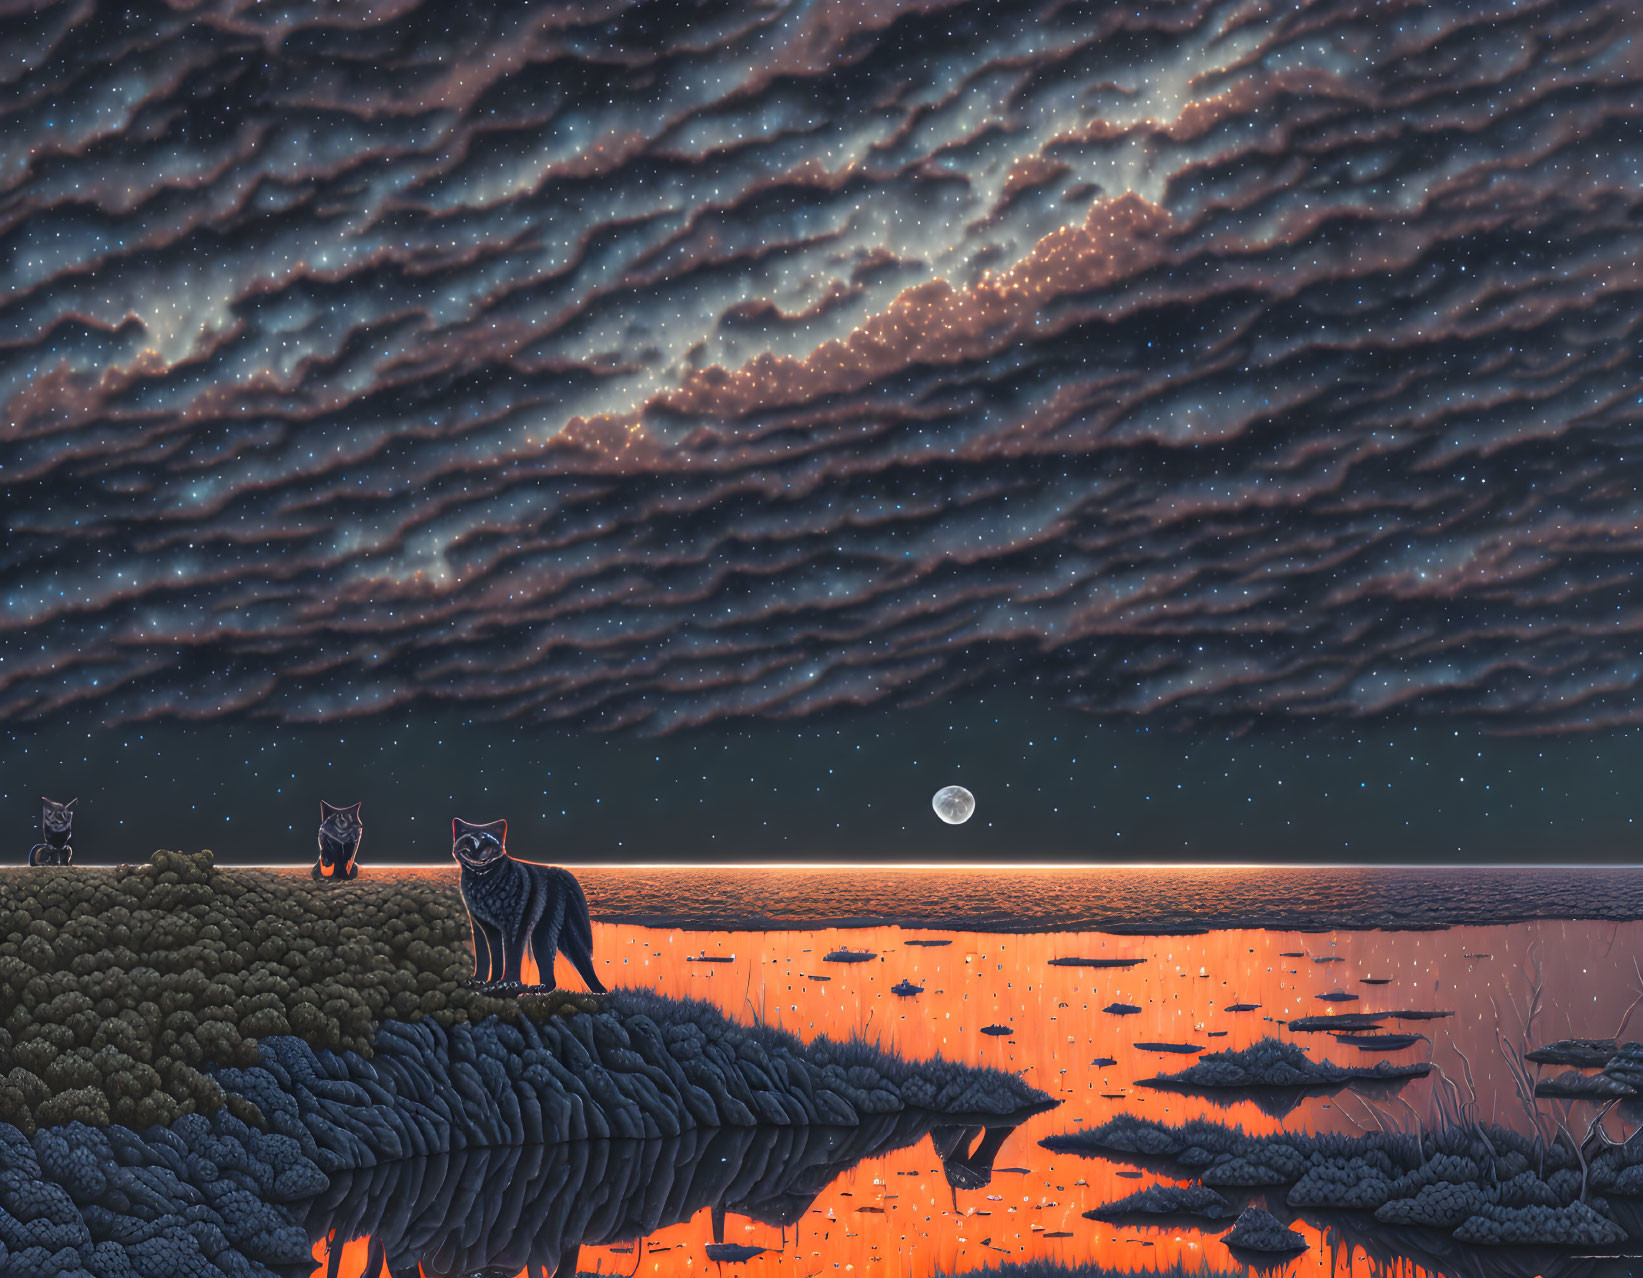 Patterned Clouds and Glowing-Eyed Cats in Surreal Moonlit Landscape